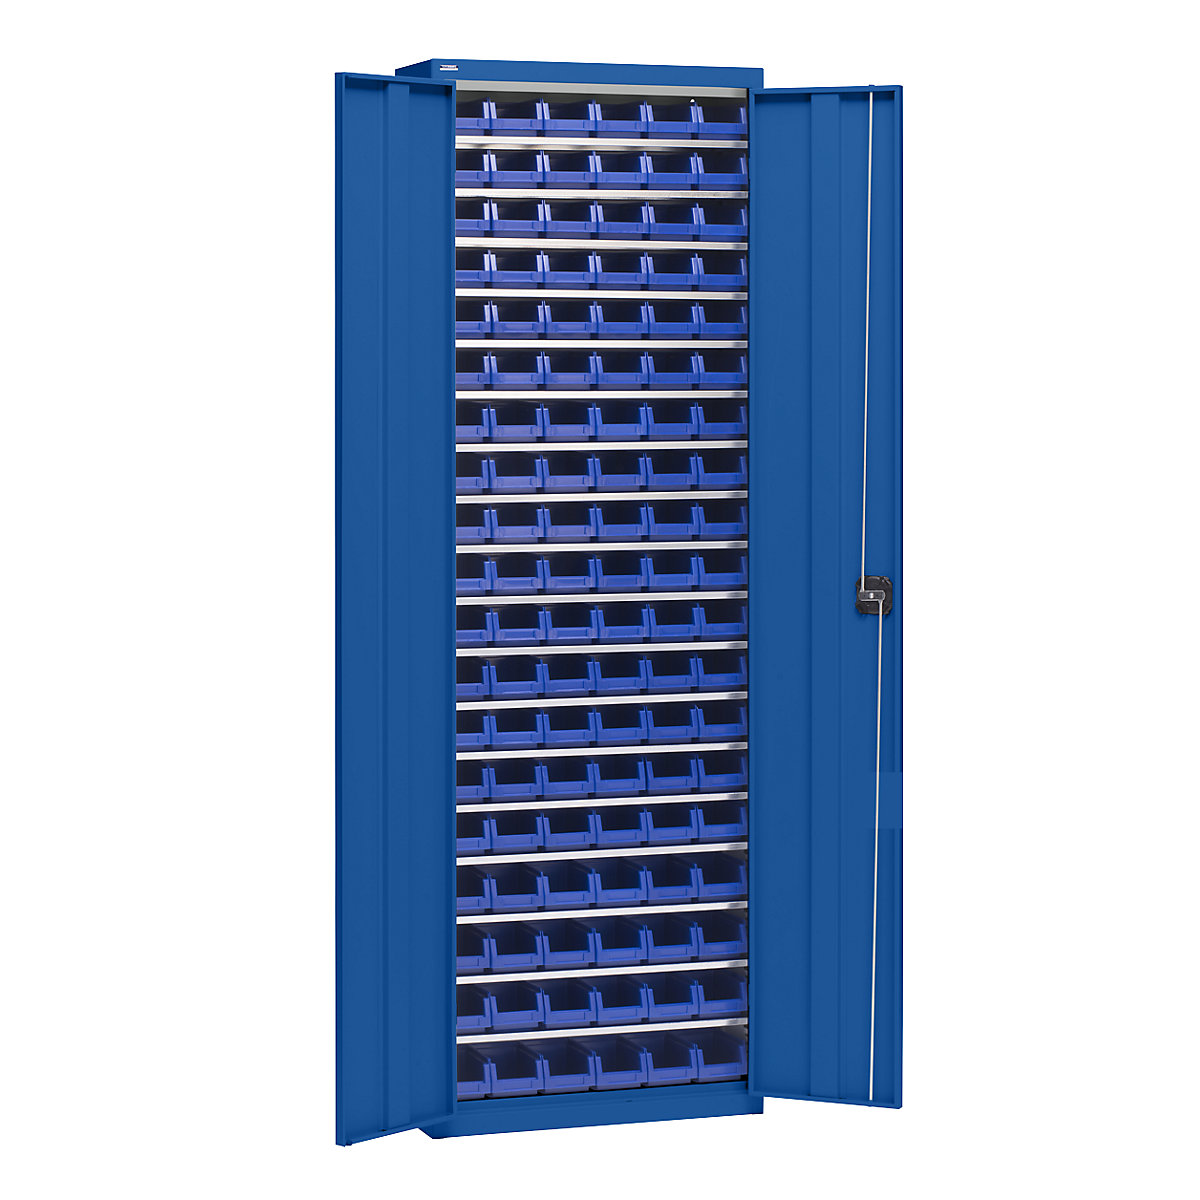 Storage cupboard with storage boxes – eurokraft pro, height 2000 mm, 18 shelves, gentian blue-5